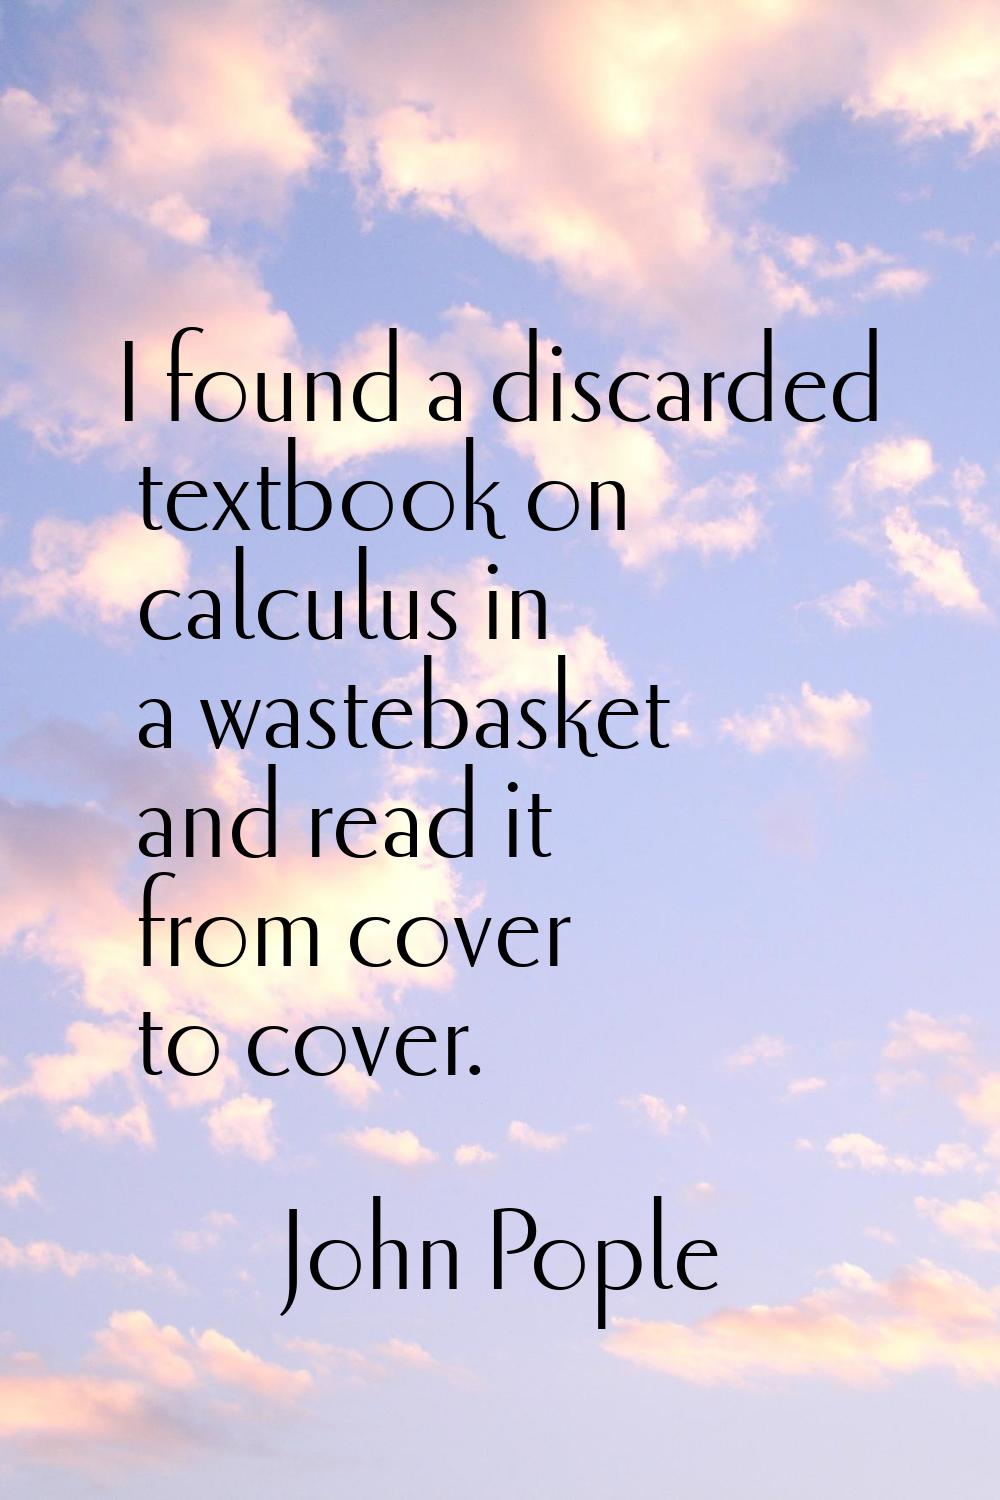 I found a discarded textbook on calculus in a wastebasket and read it from cover to cover.